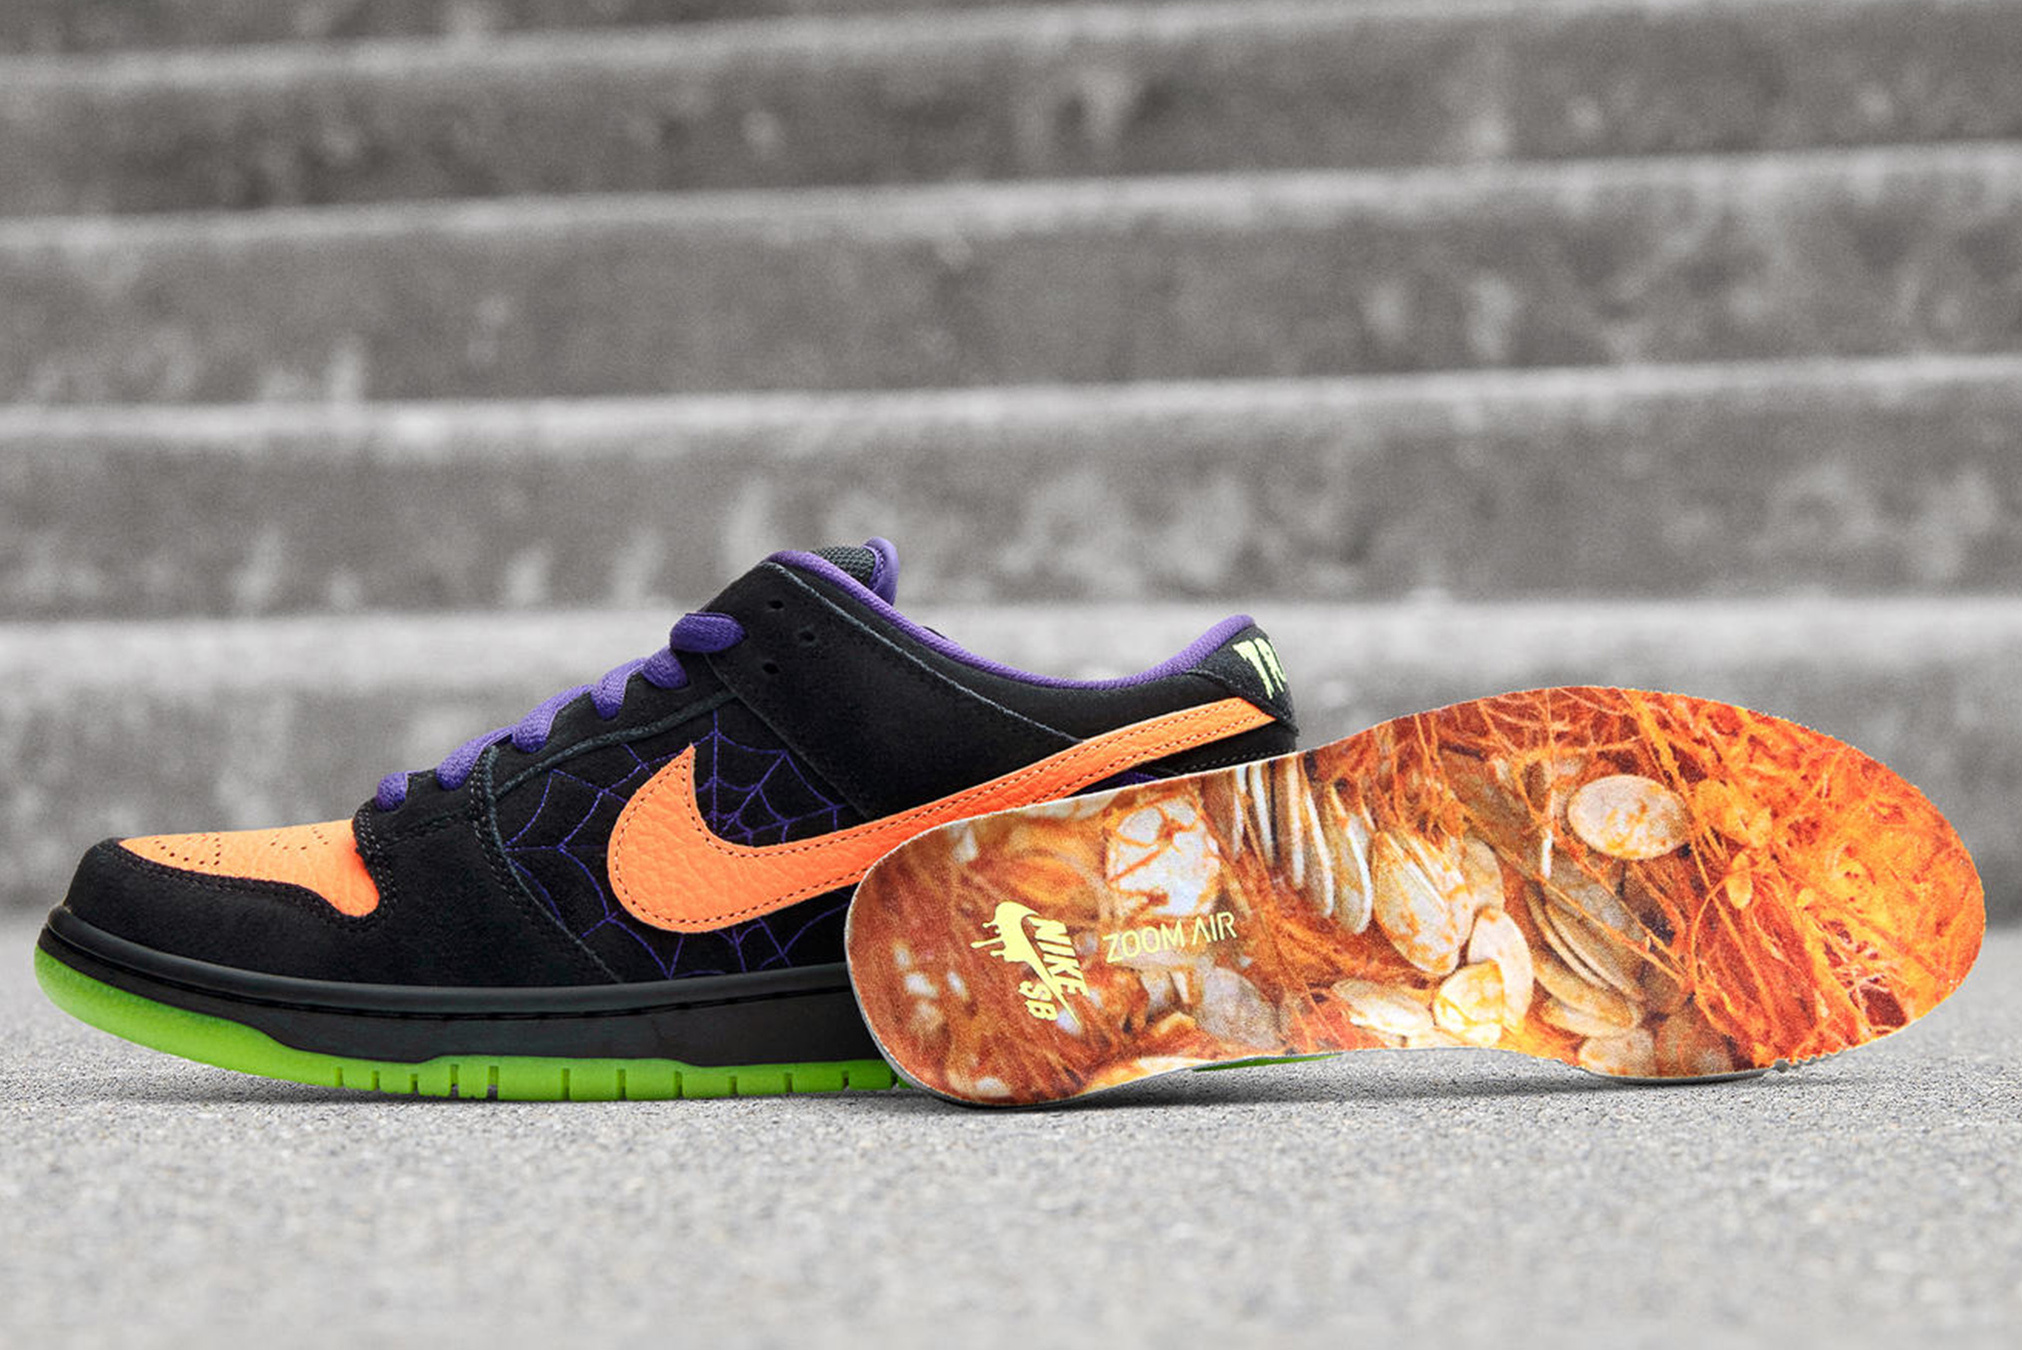 Nike SB Dunk Low Pro - Register Now on END. Launches | END.